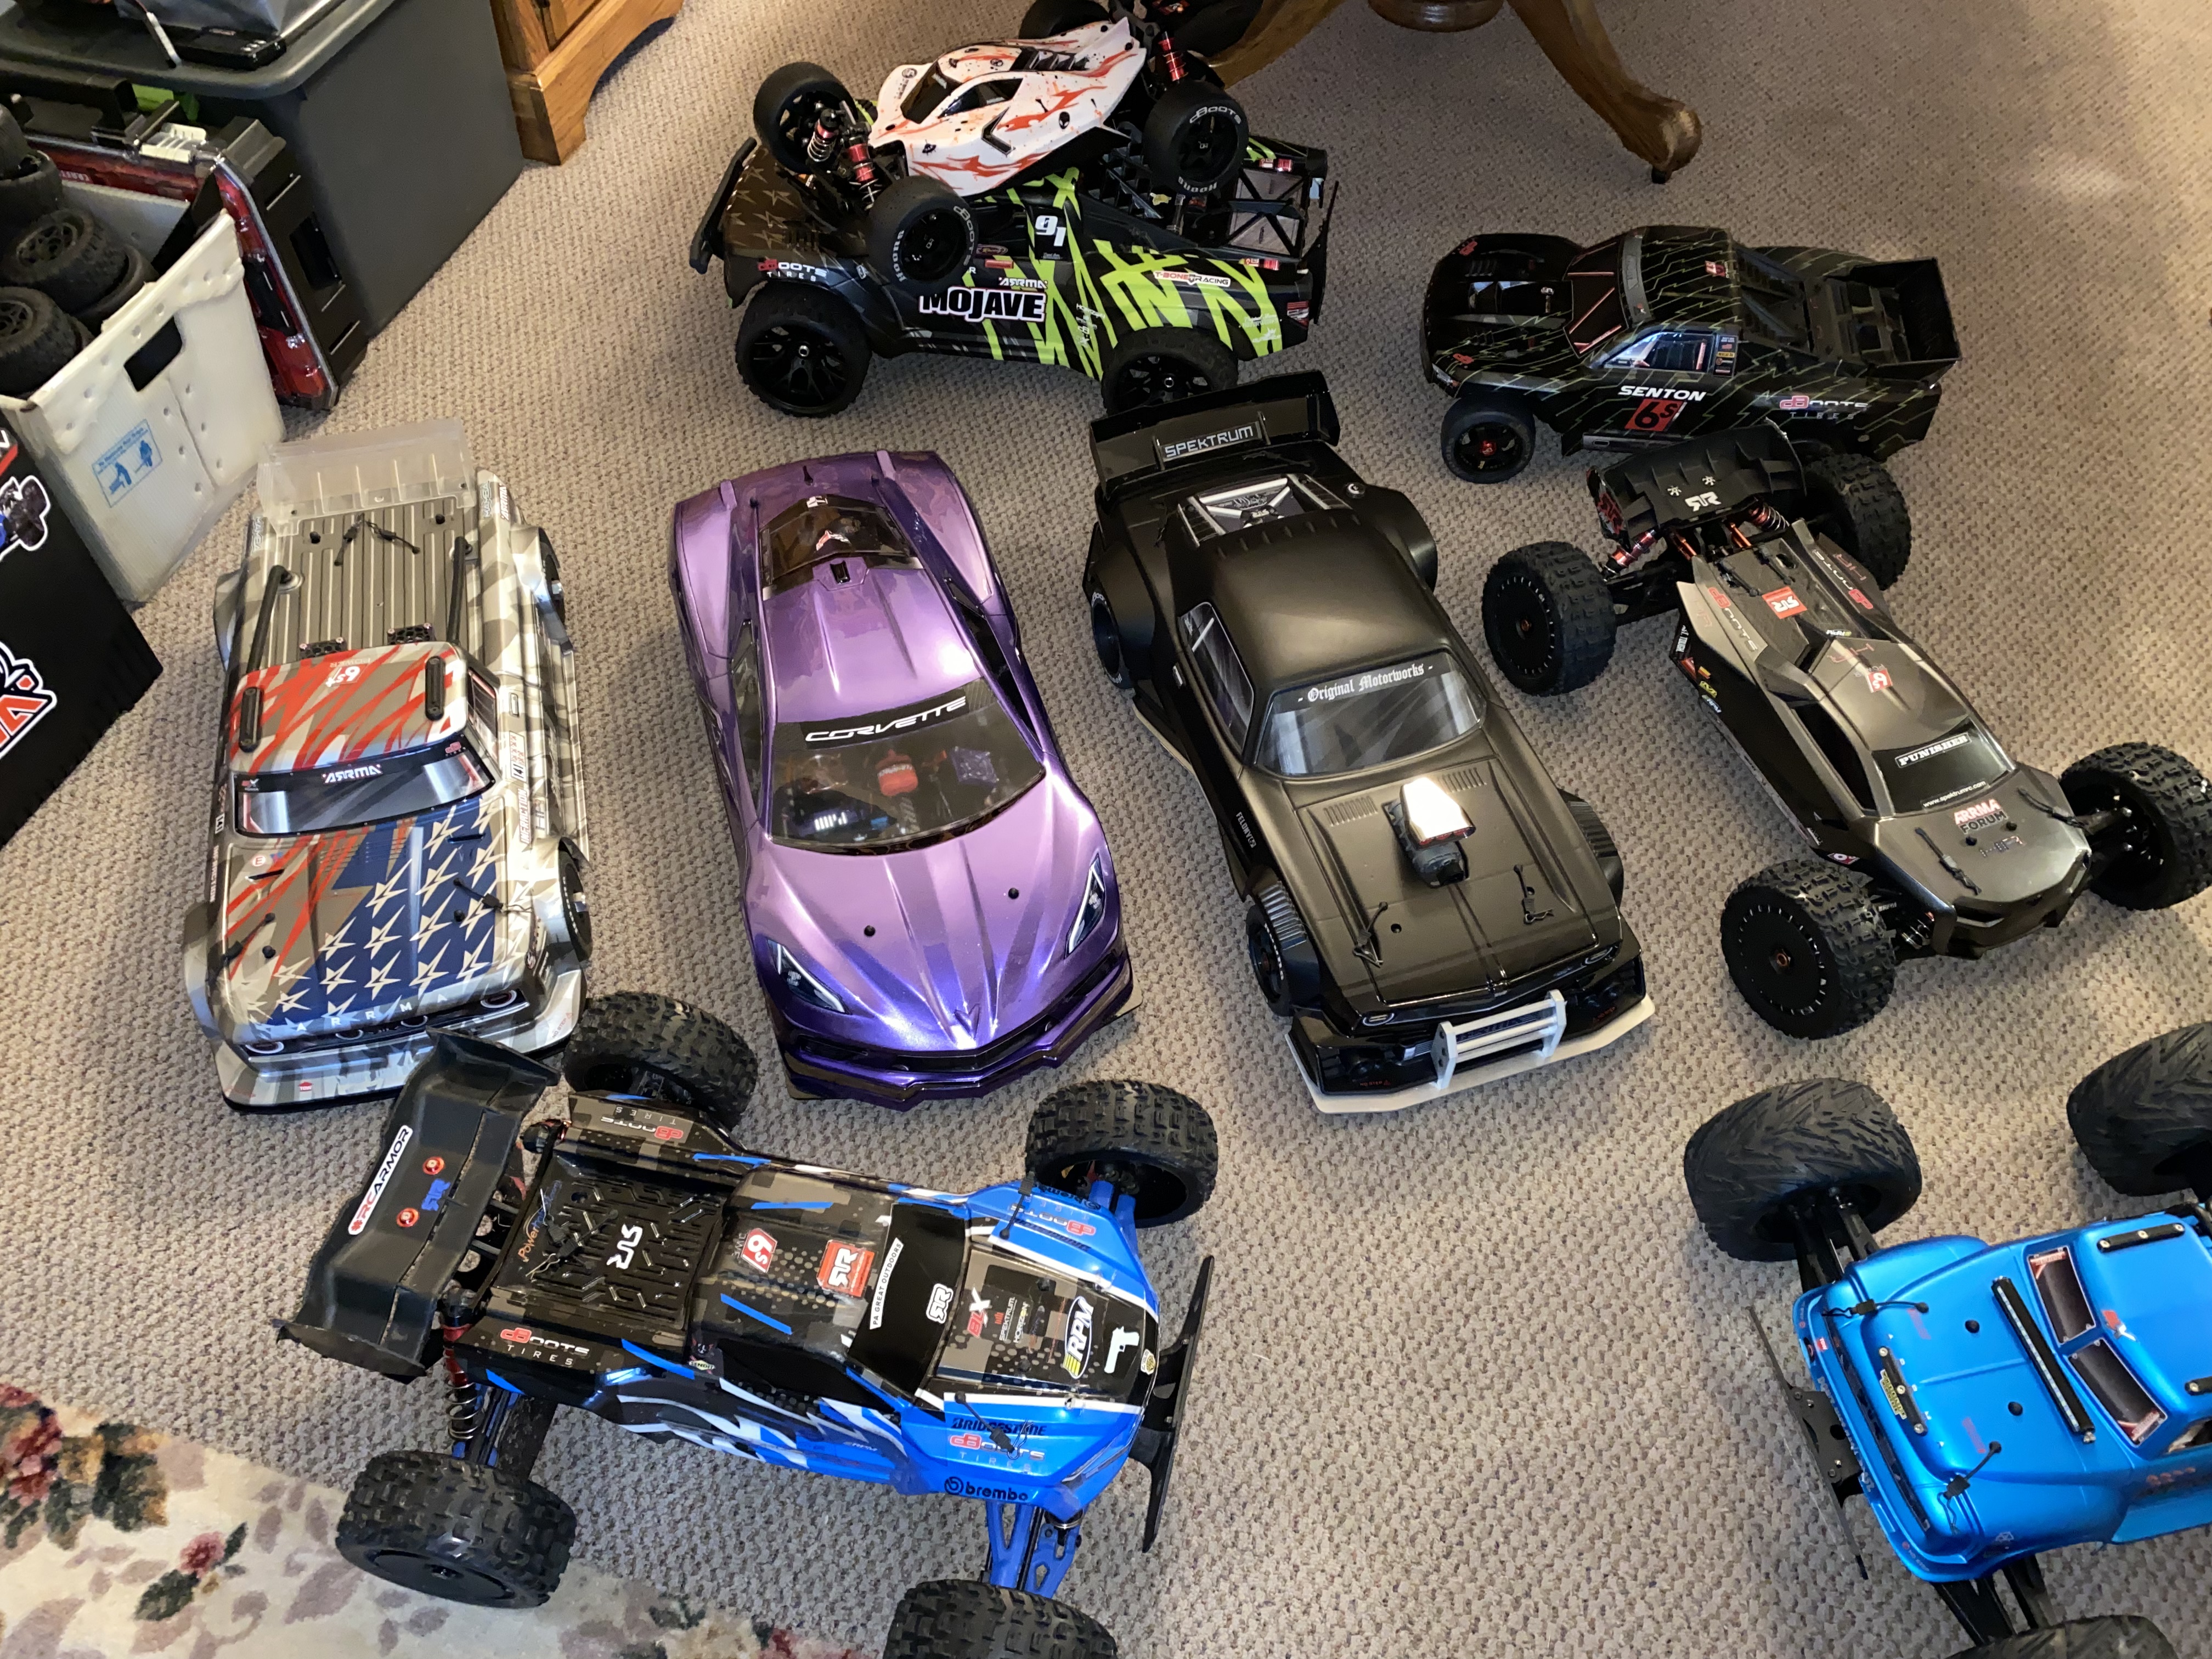 Arrma collection